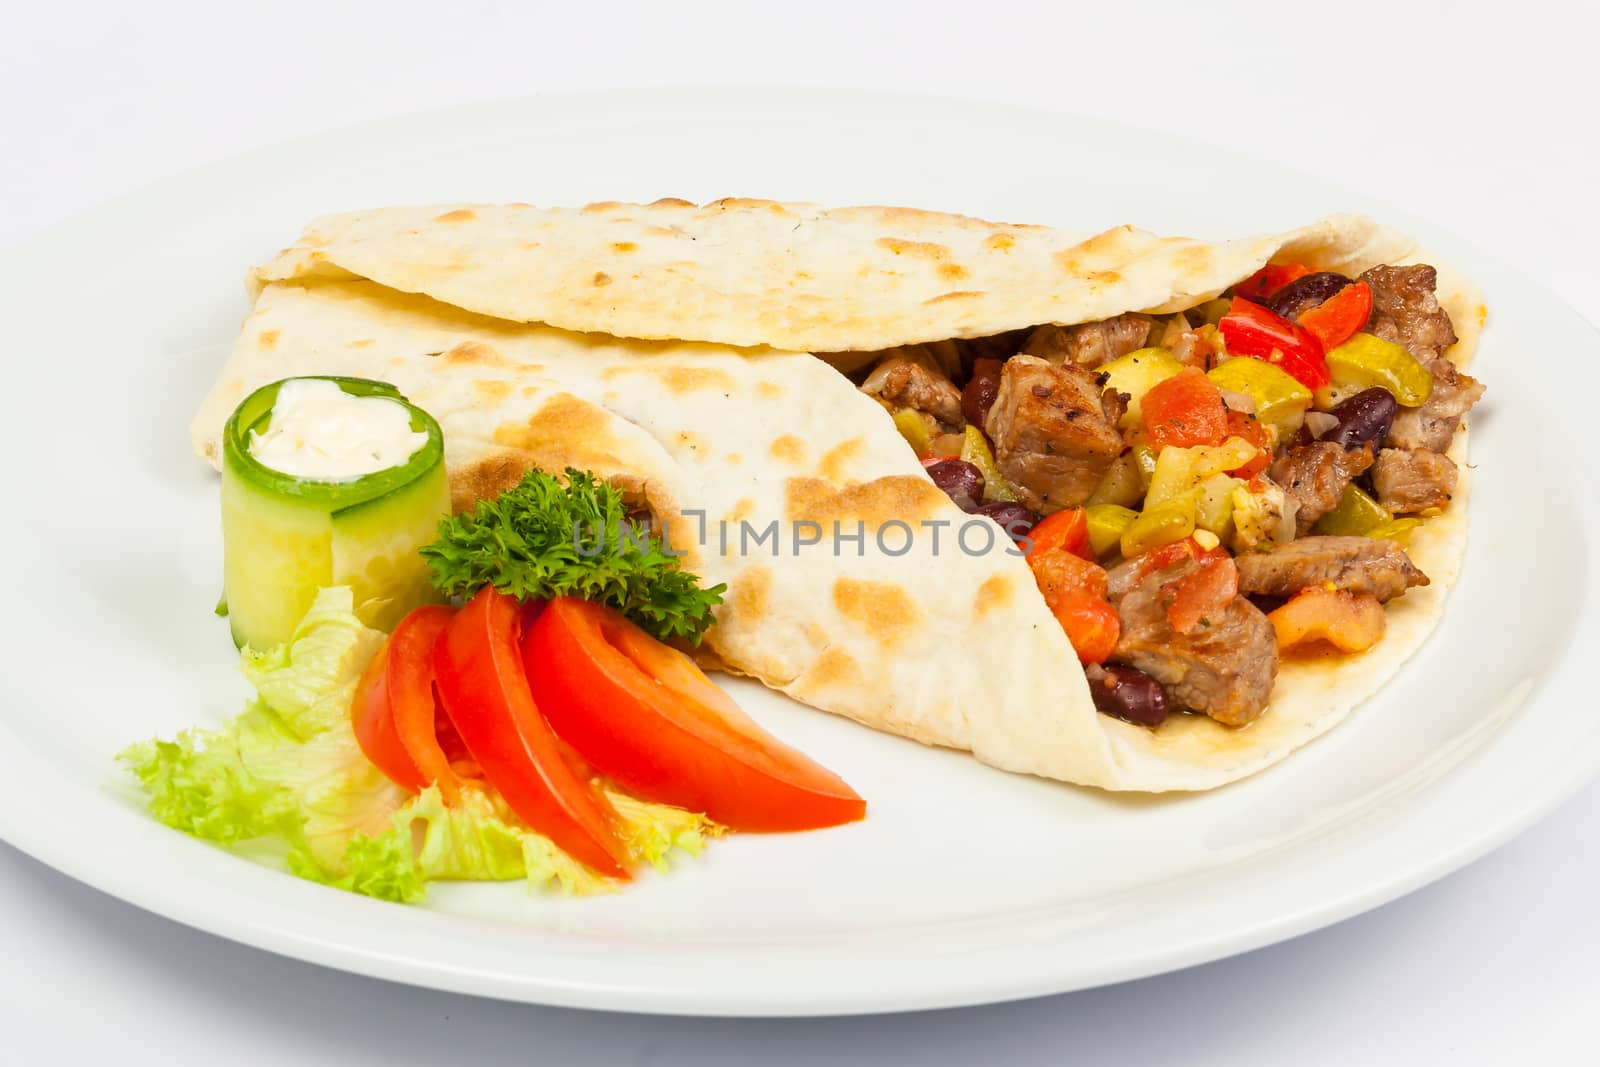 eastern spicy burrito with meat and vegetables